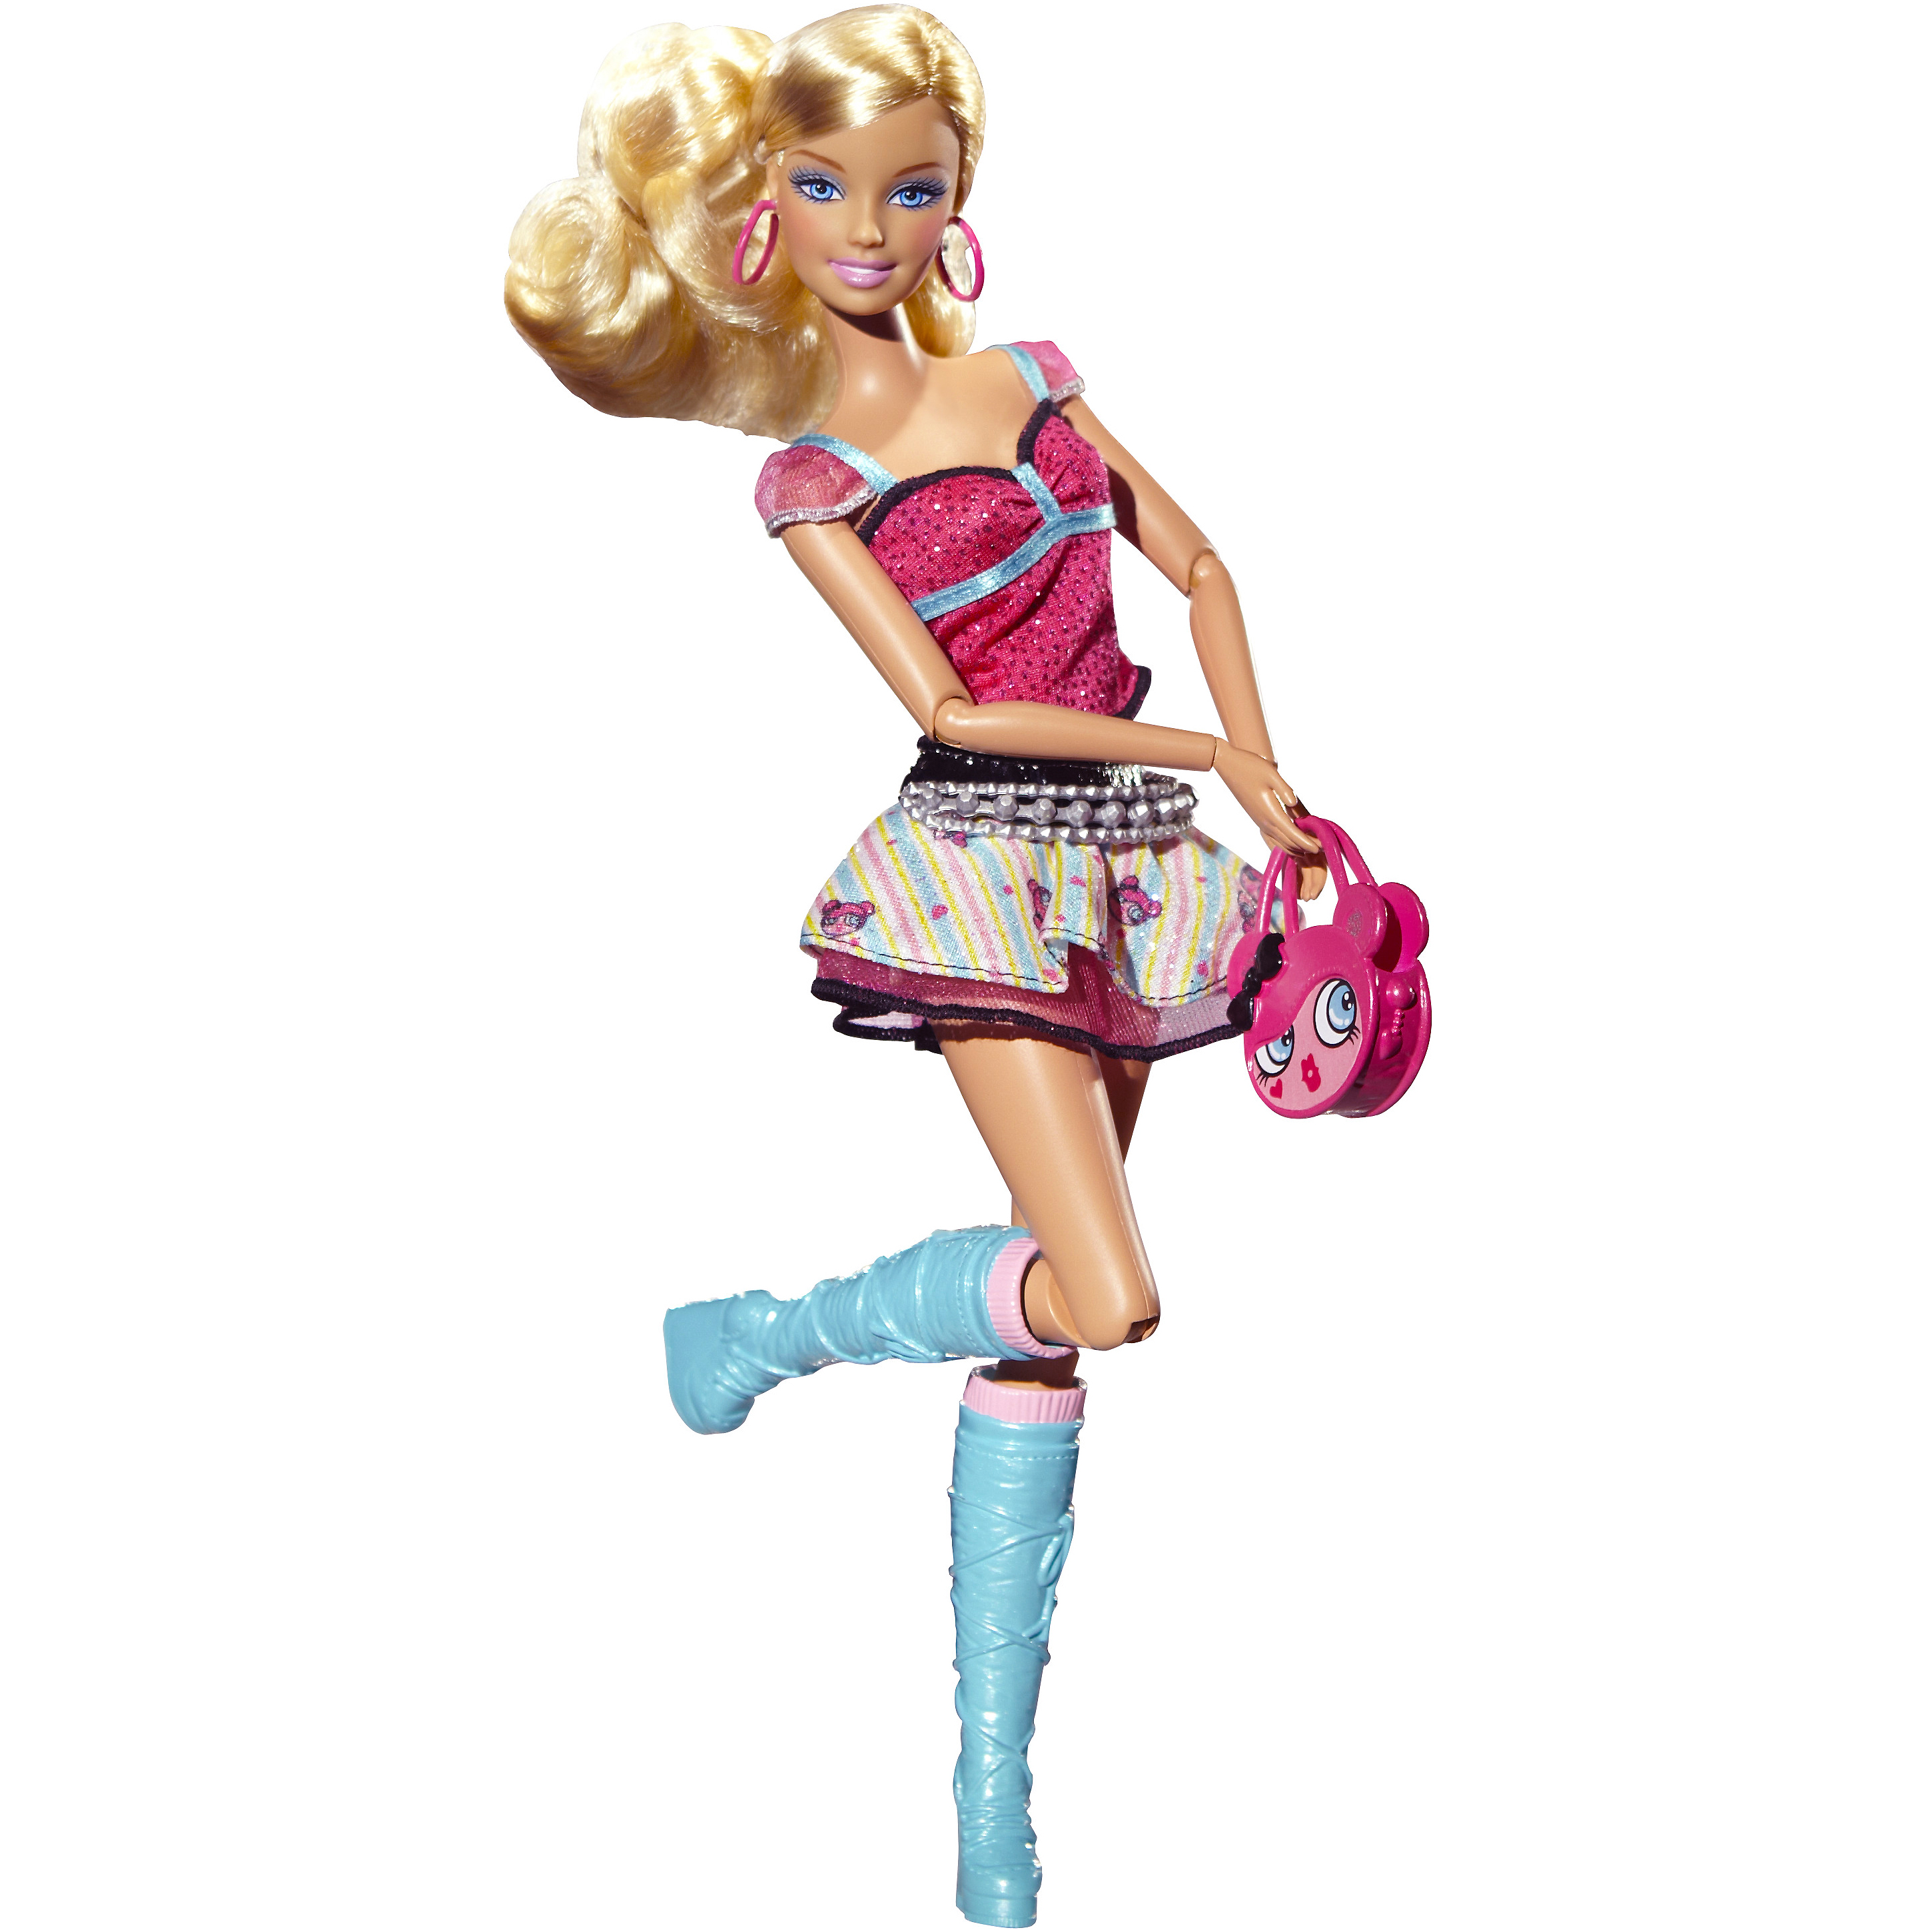 https://static.wikia.nocookie.net/barbie/images/0/03/Fashionistas_Cutie_Doll_R9879_%2801%29.jpg/revision/latest?cb=20210509044229